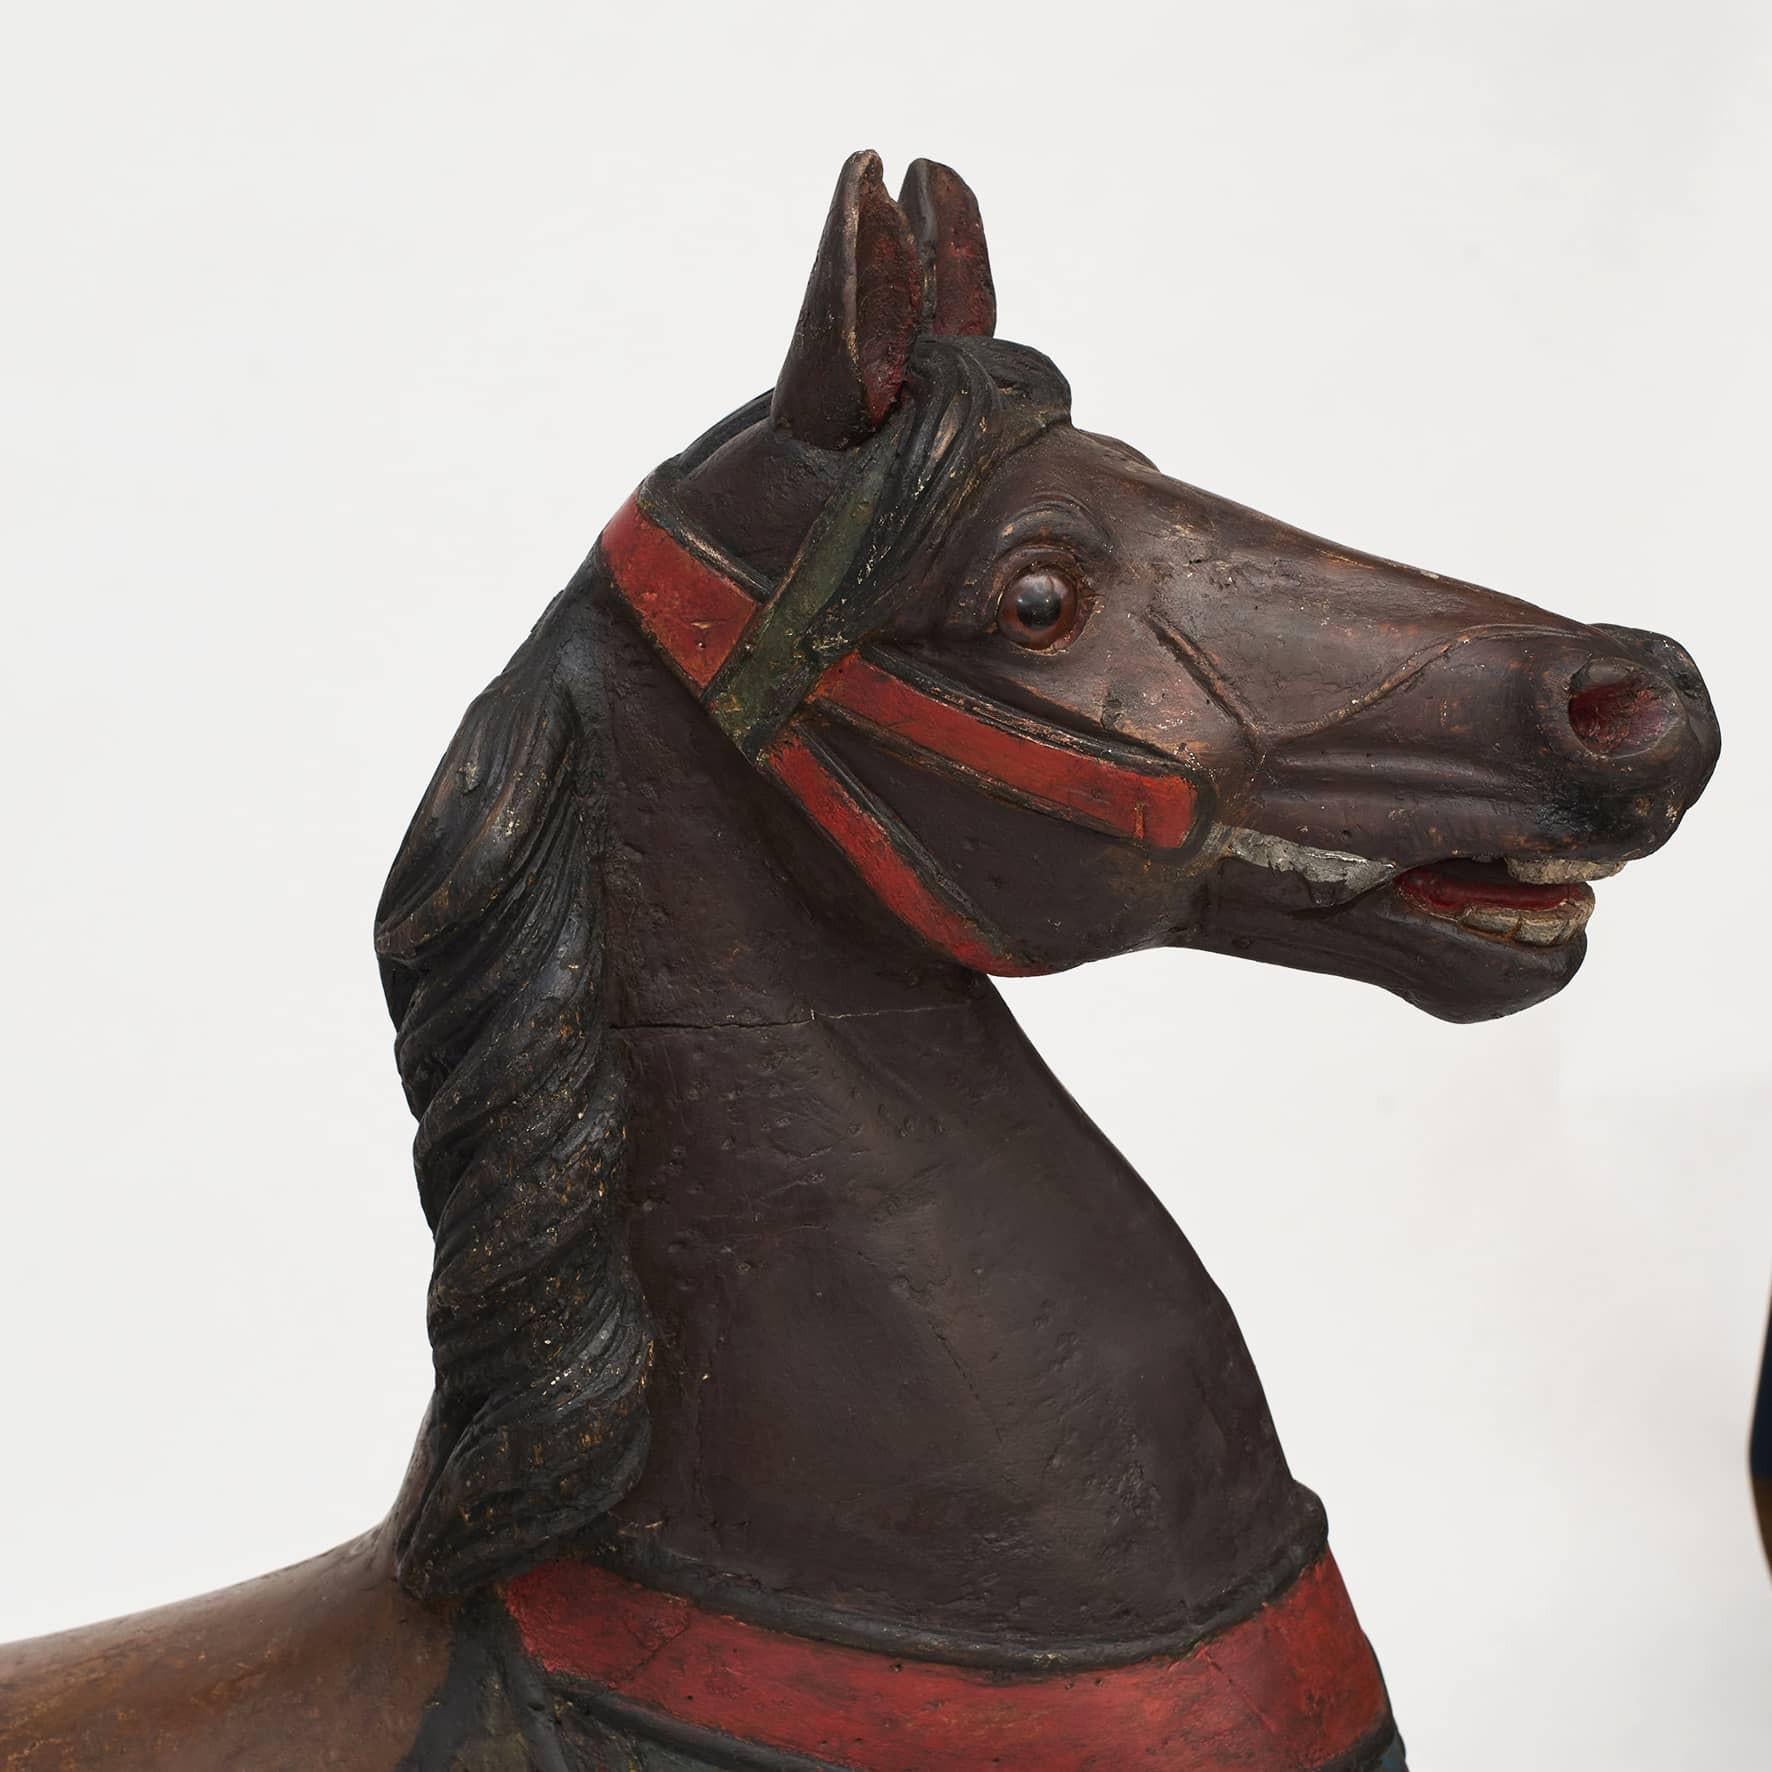 Wooden carousel / merry-go-round horse made for the first carousel in Tivoli, Copenhagen, c. 1840-1850.
Hand carved with nice details, glass eyes and a real horse hair tale.
With its original coats of decorative paint, professional